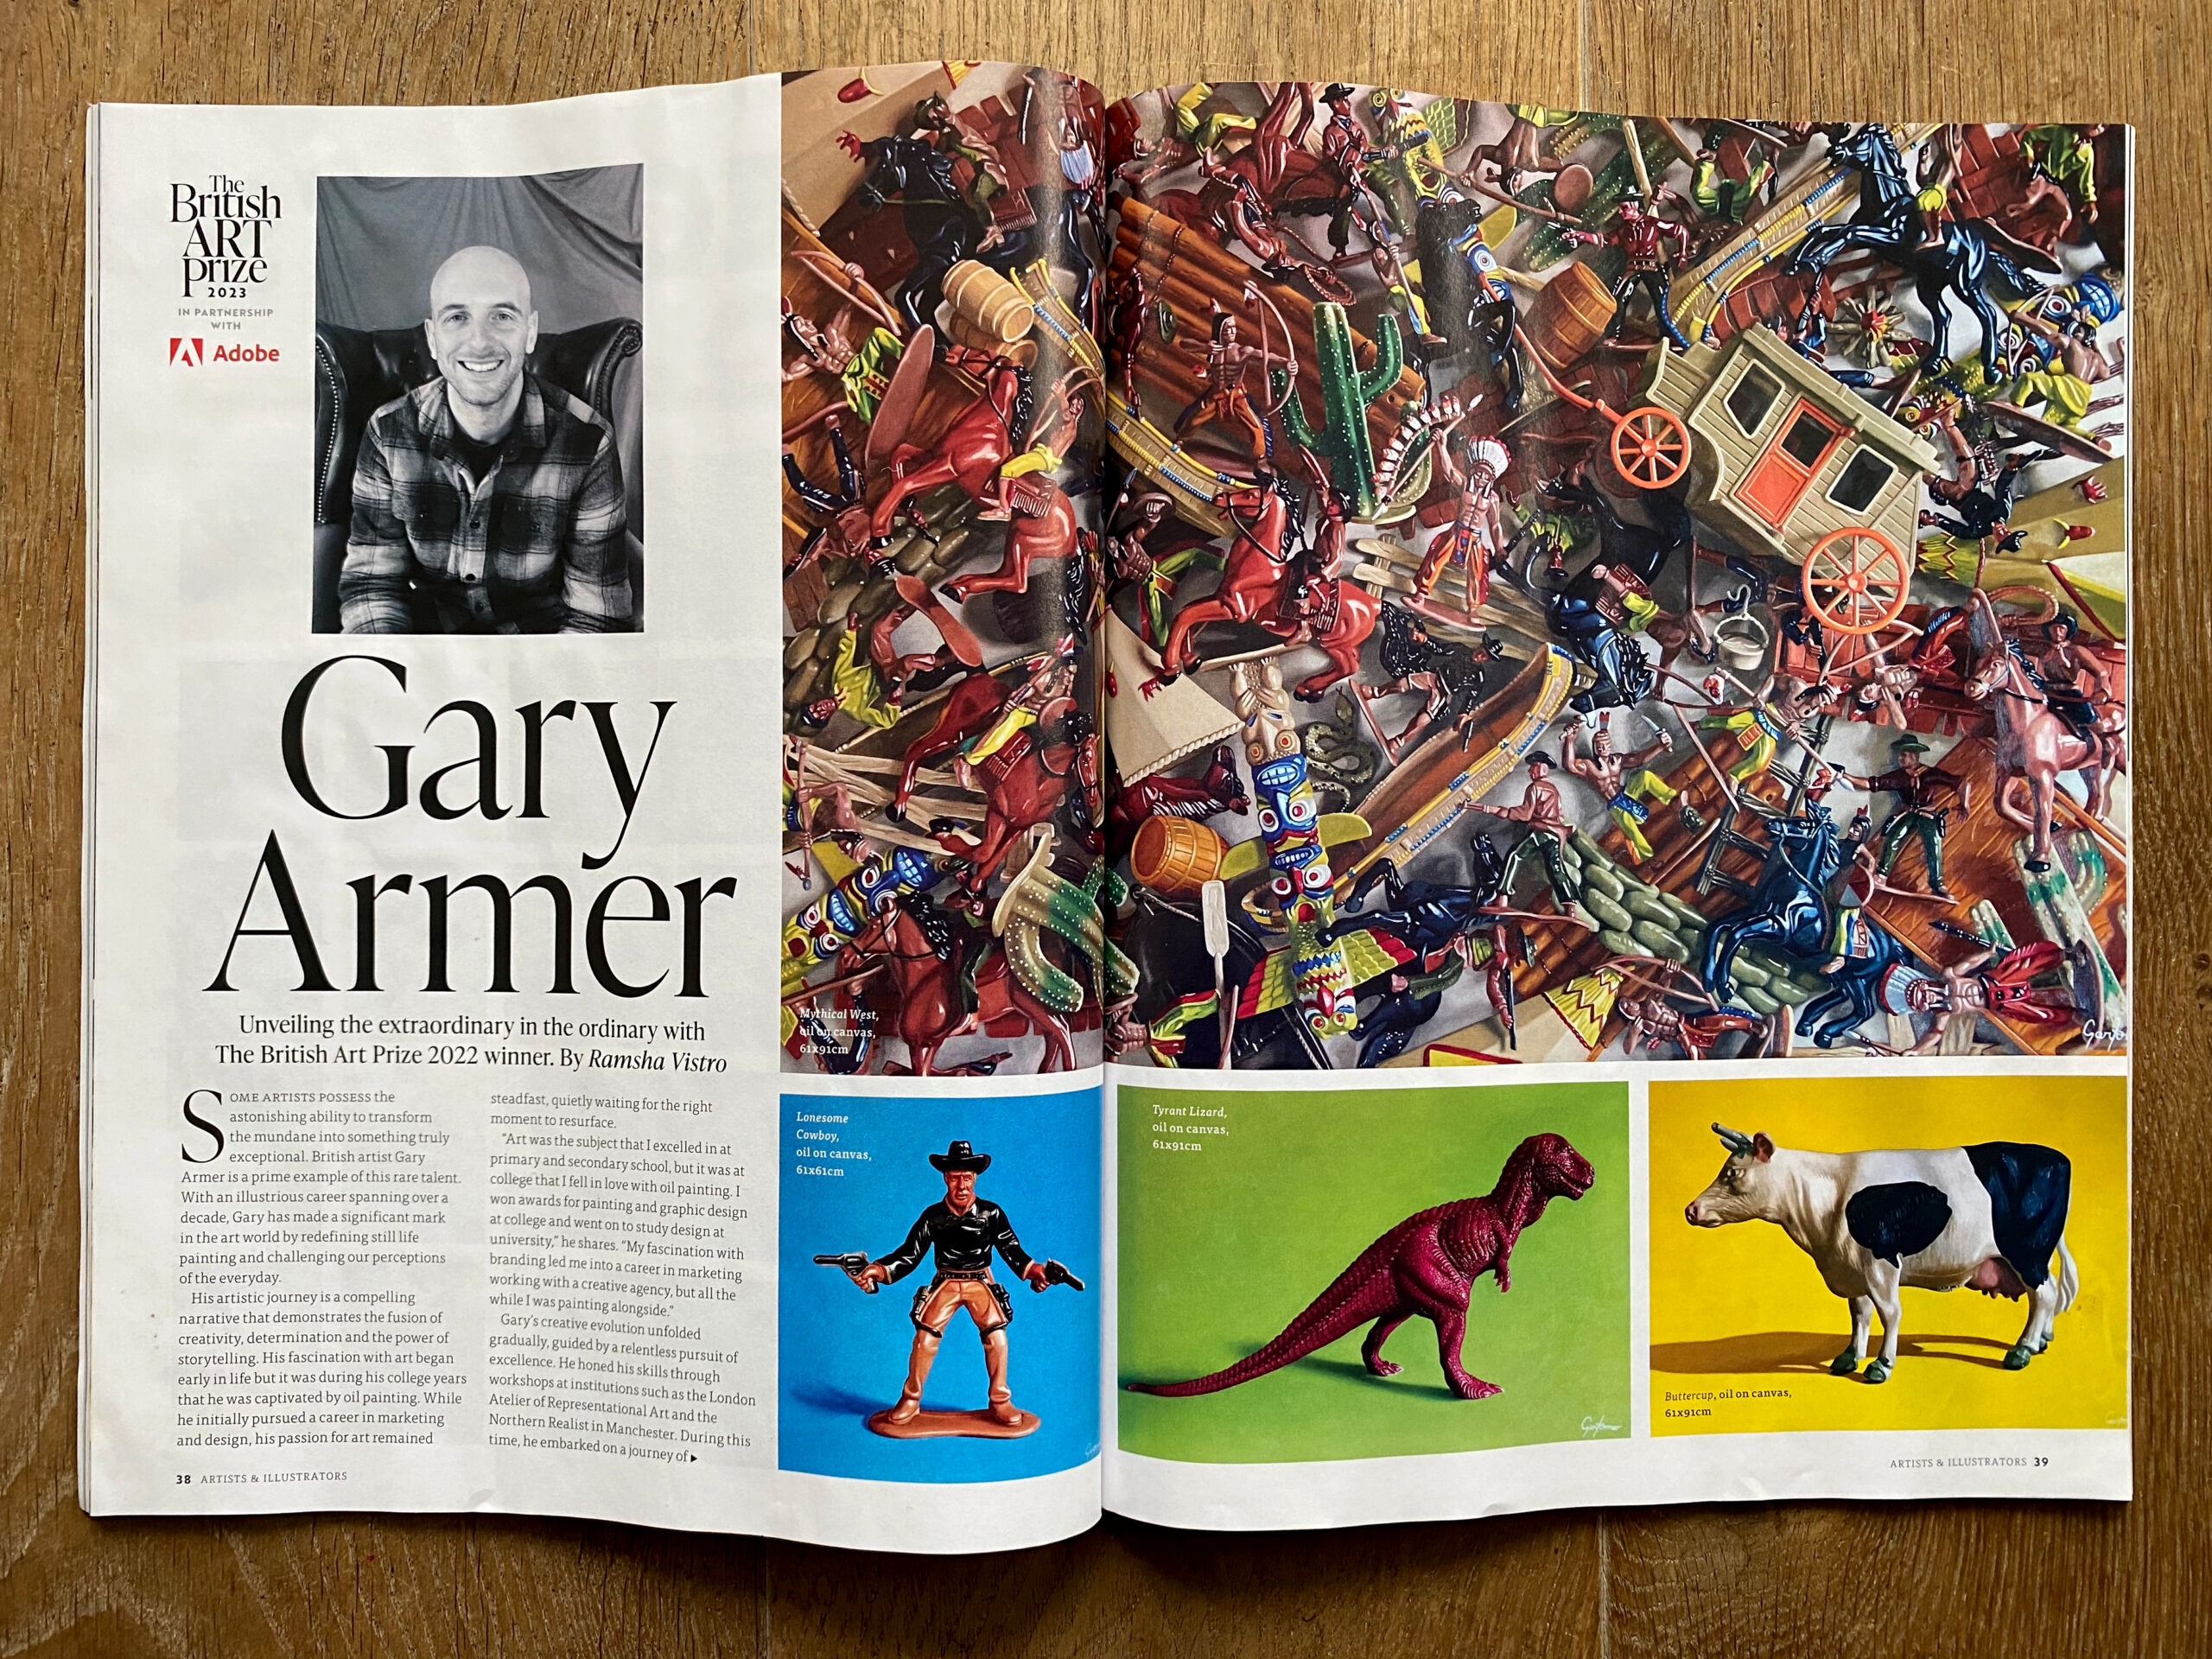 Gary Armer Artist Unveiling the extraordinary in the ordinary article